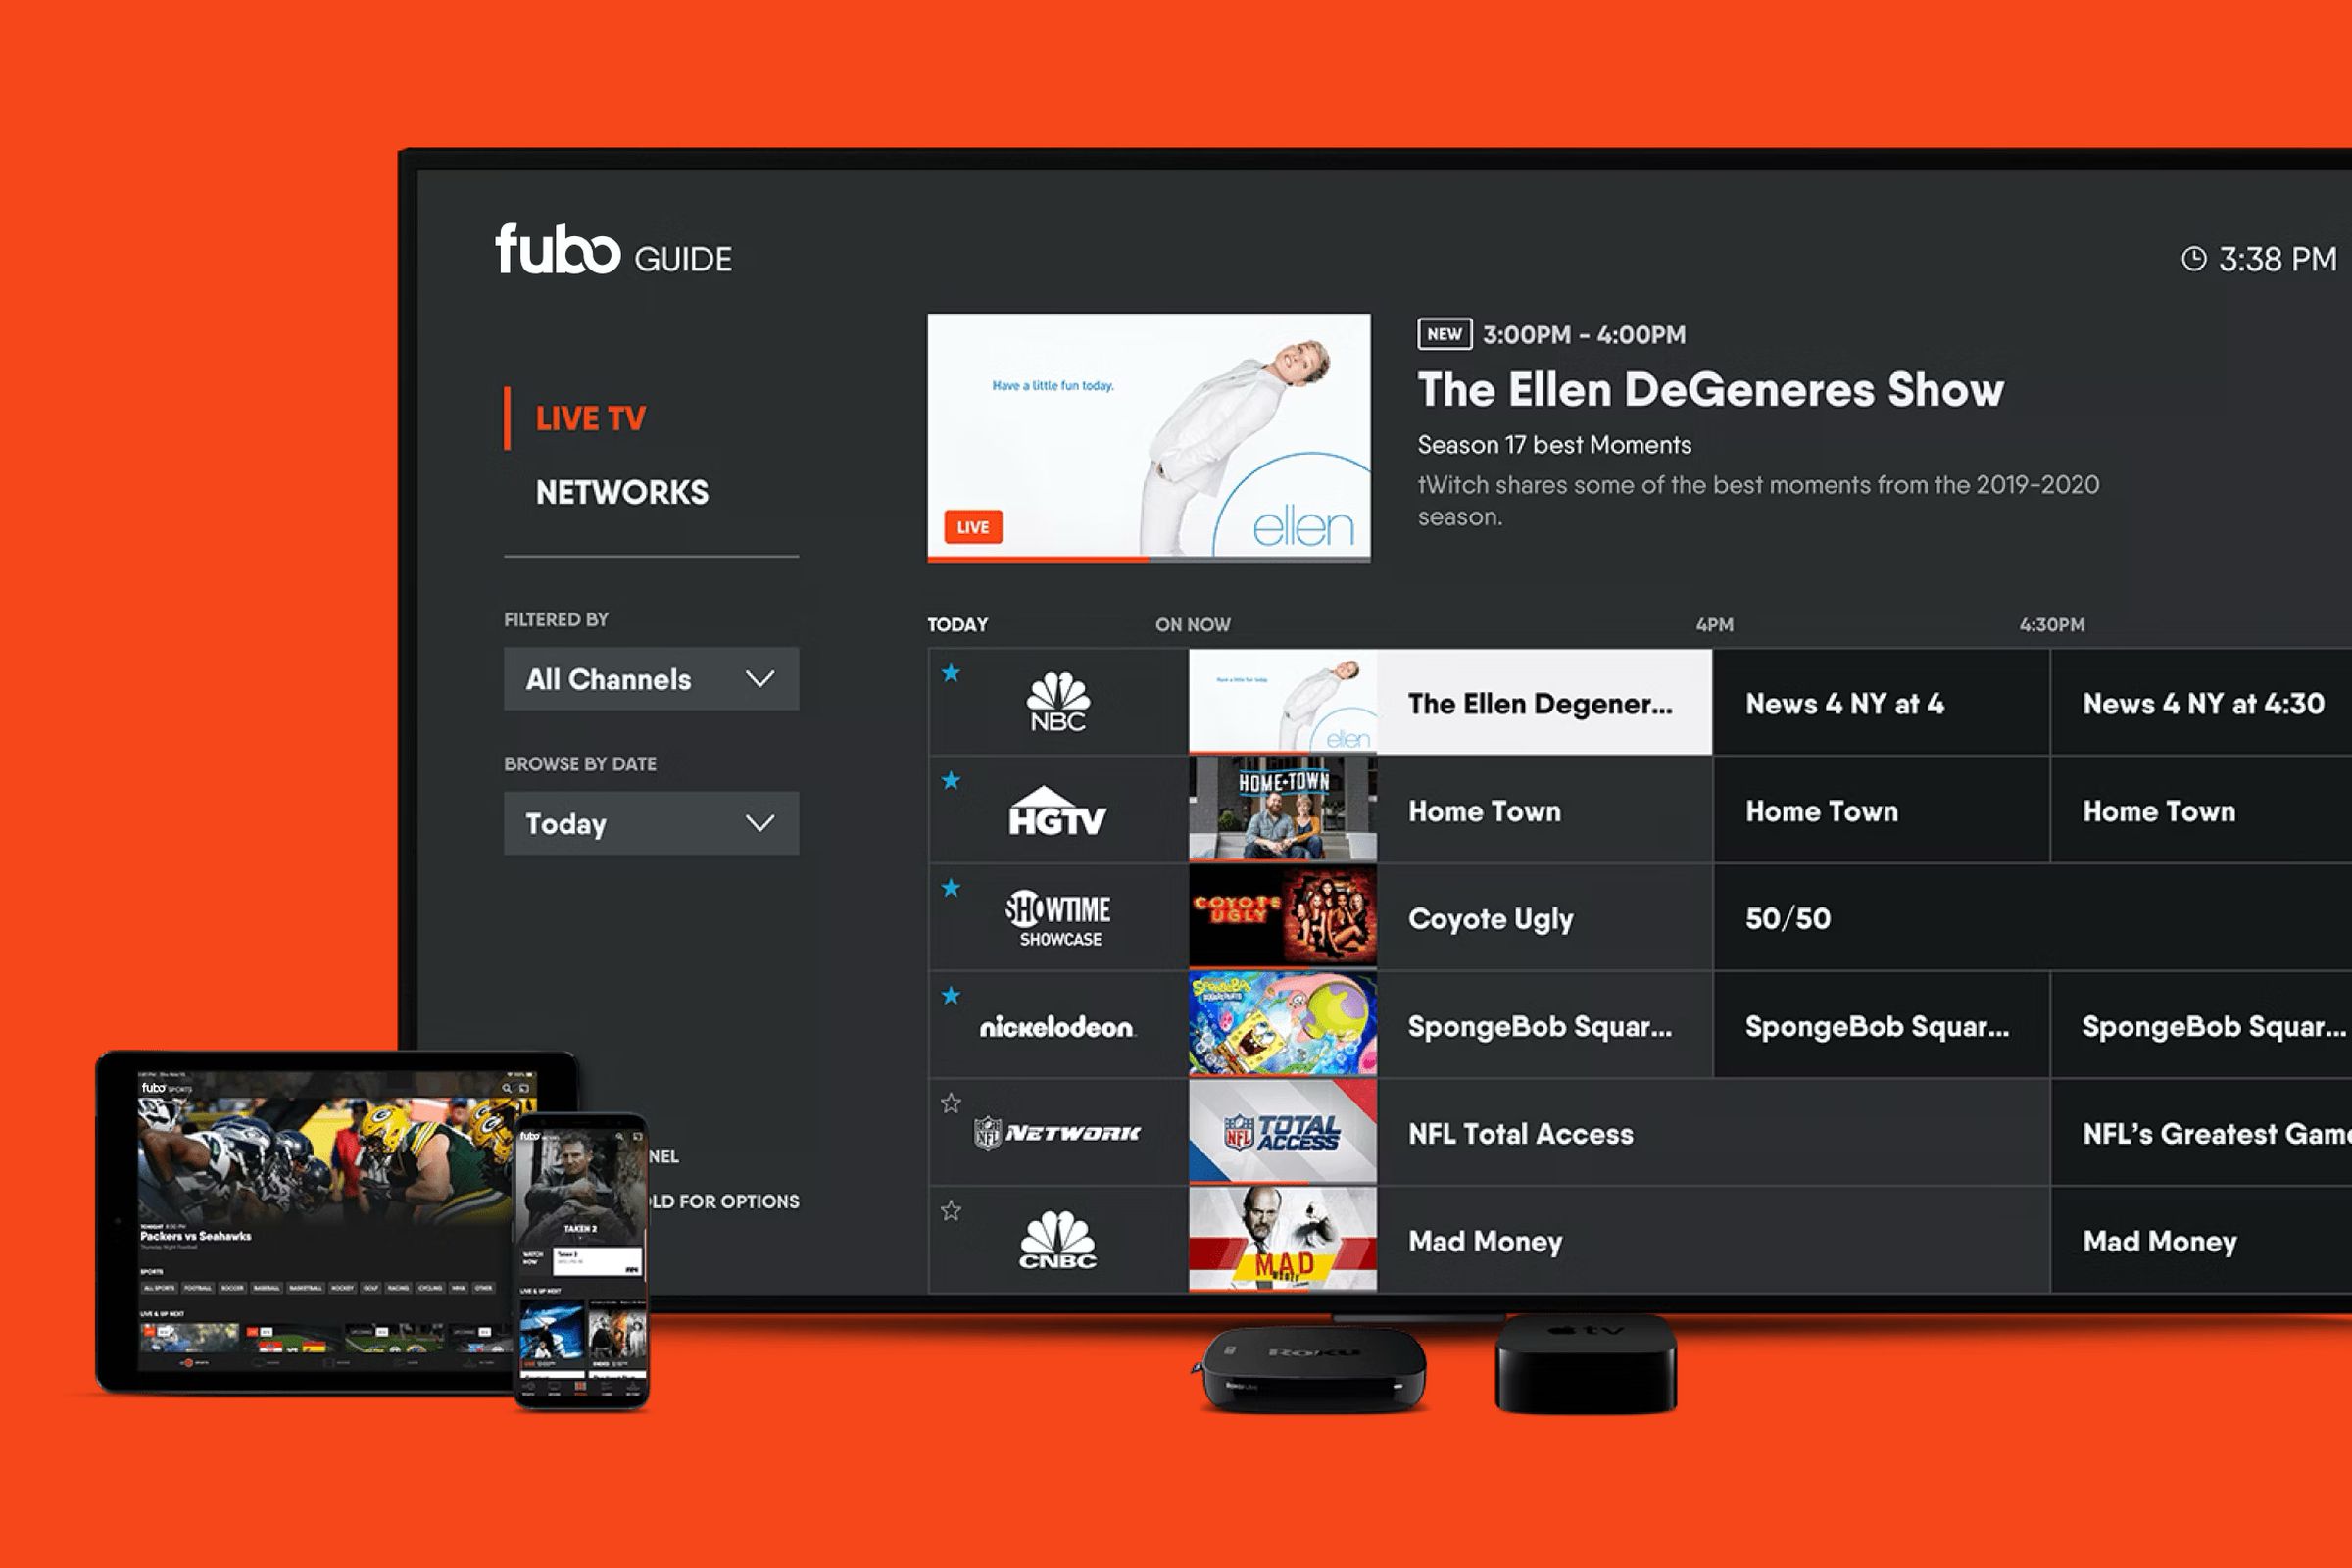 A marketing image of Fubo’s streaming TV service.